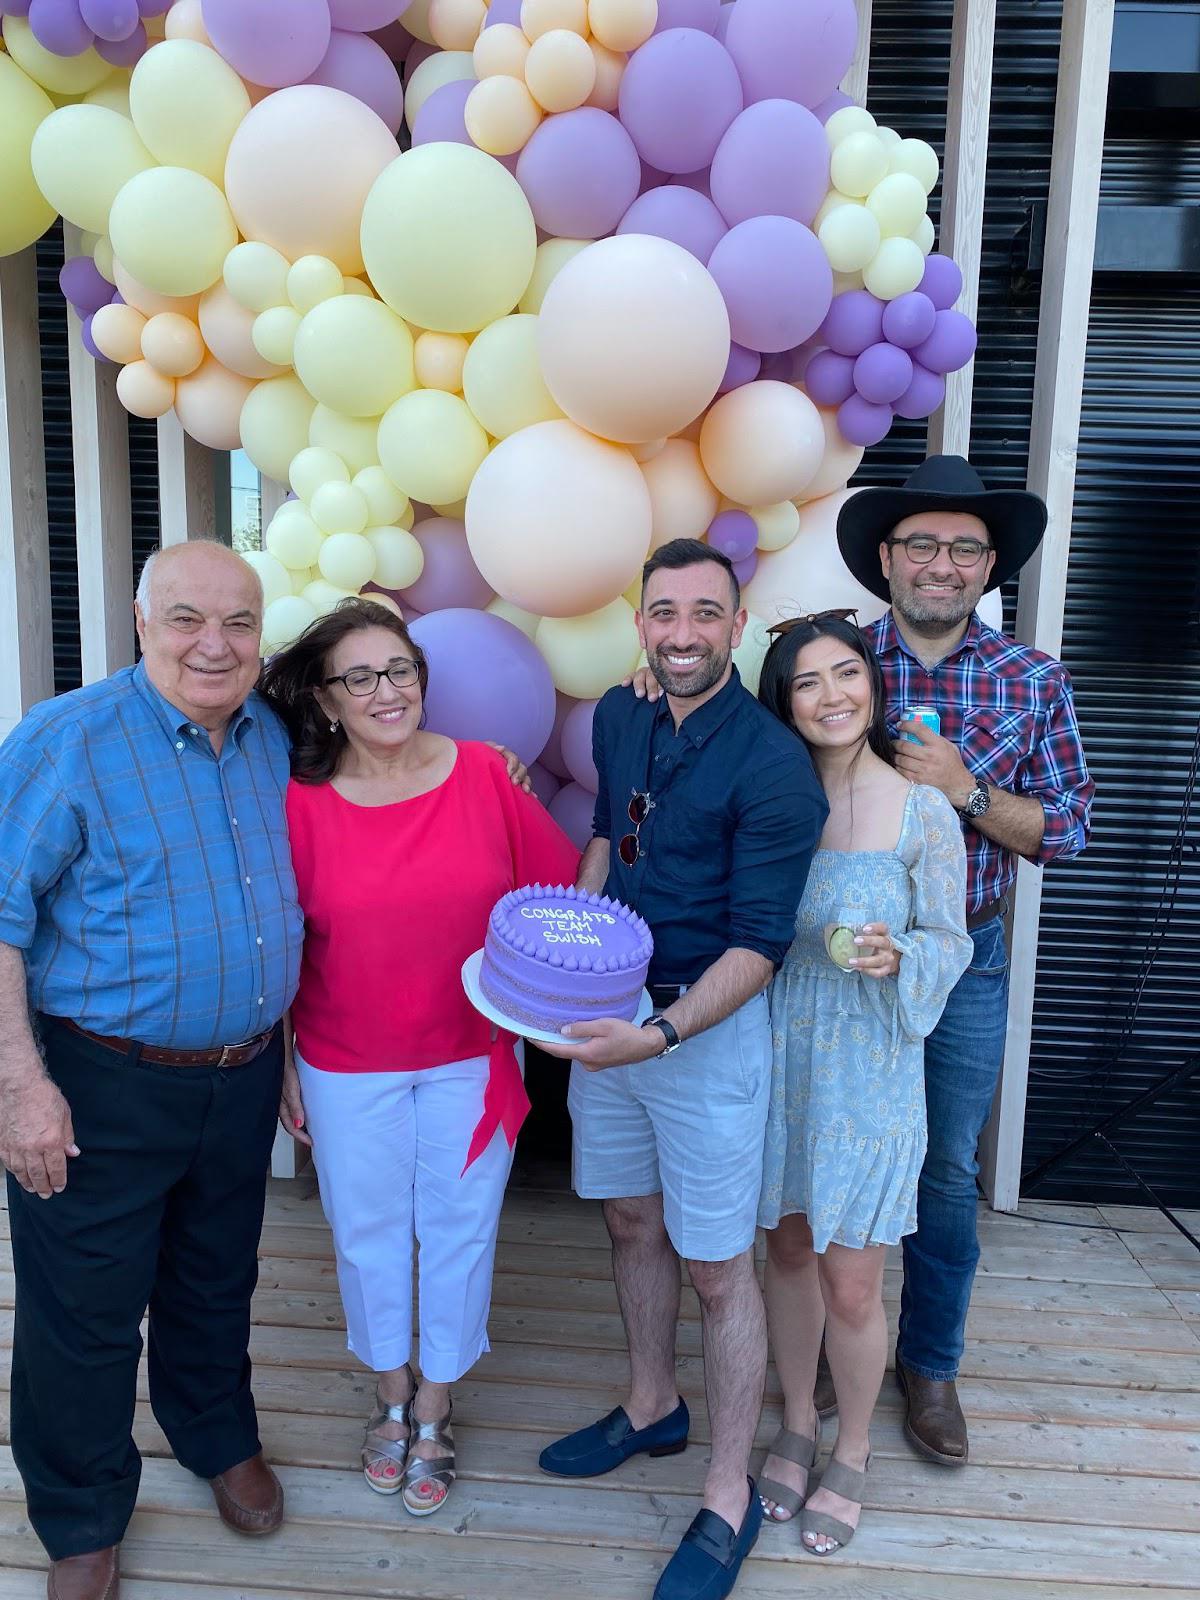 Dr. Shlah with family holding a purple cake that says 'Congrats Team Swish' in icing.